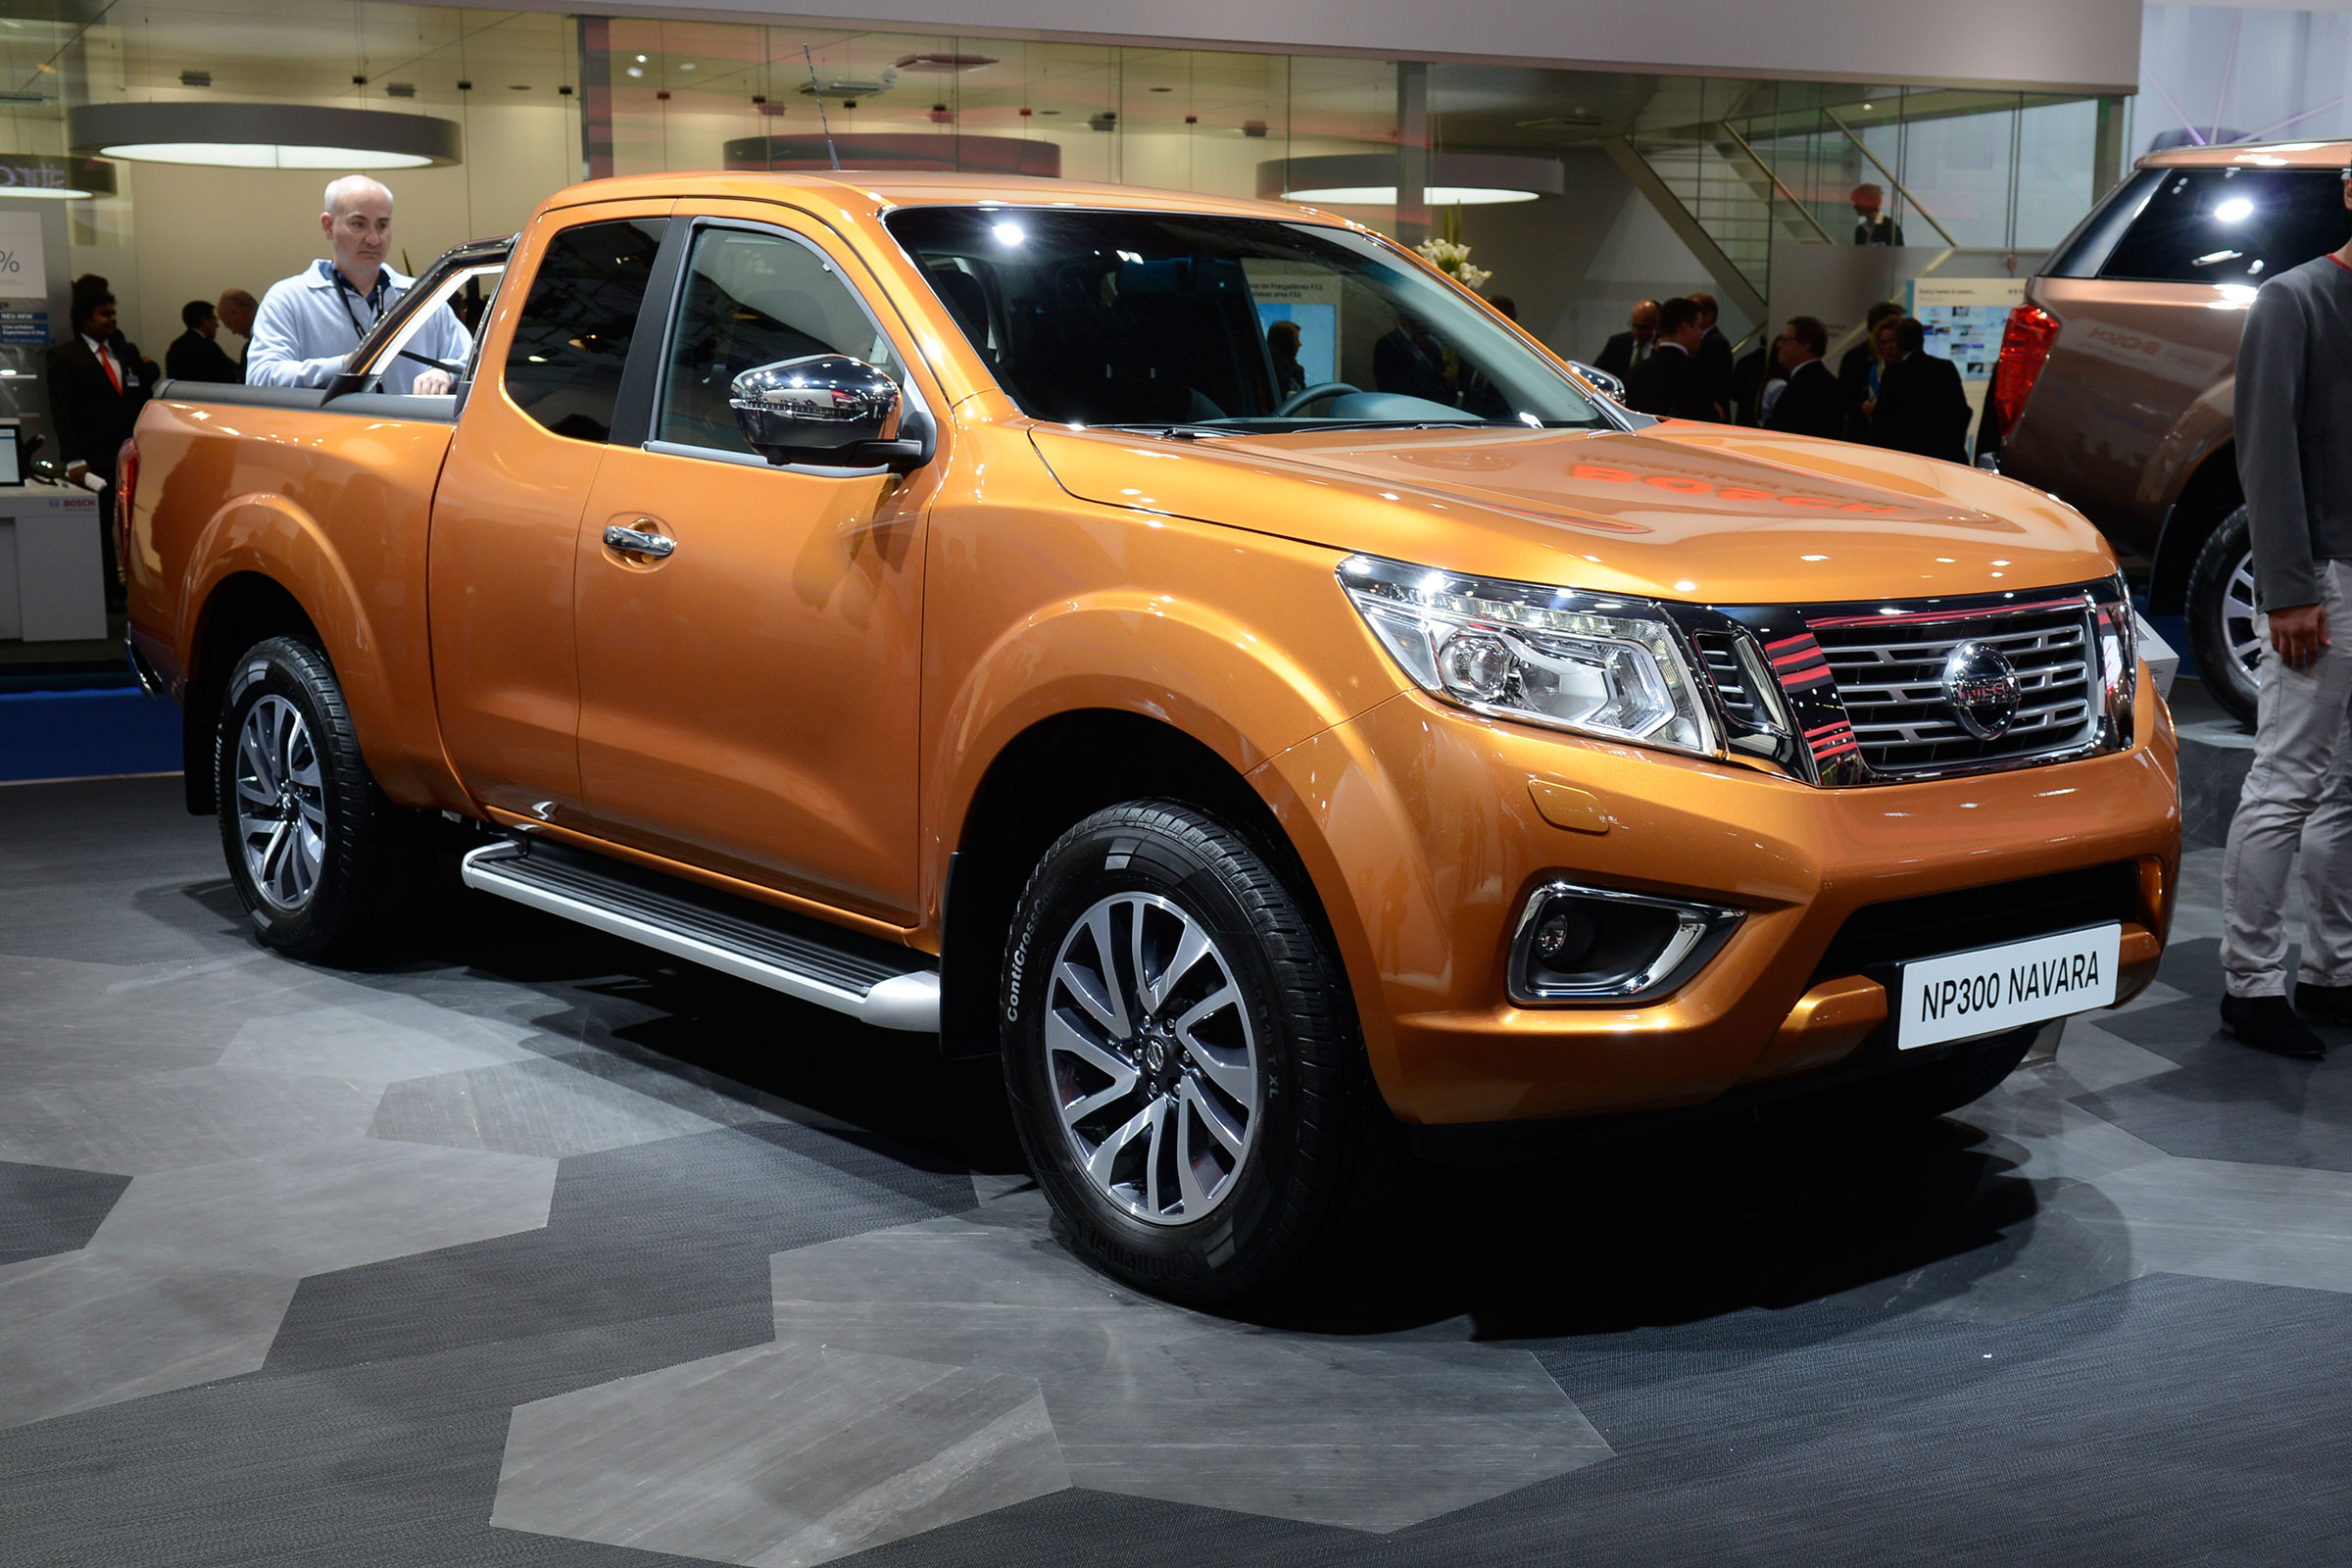 New Nissan Navara prices, specs and release date